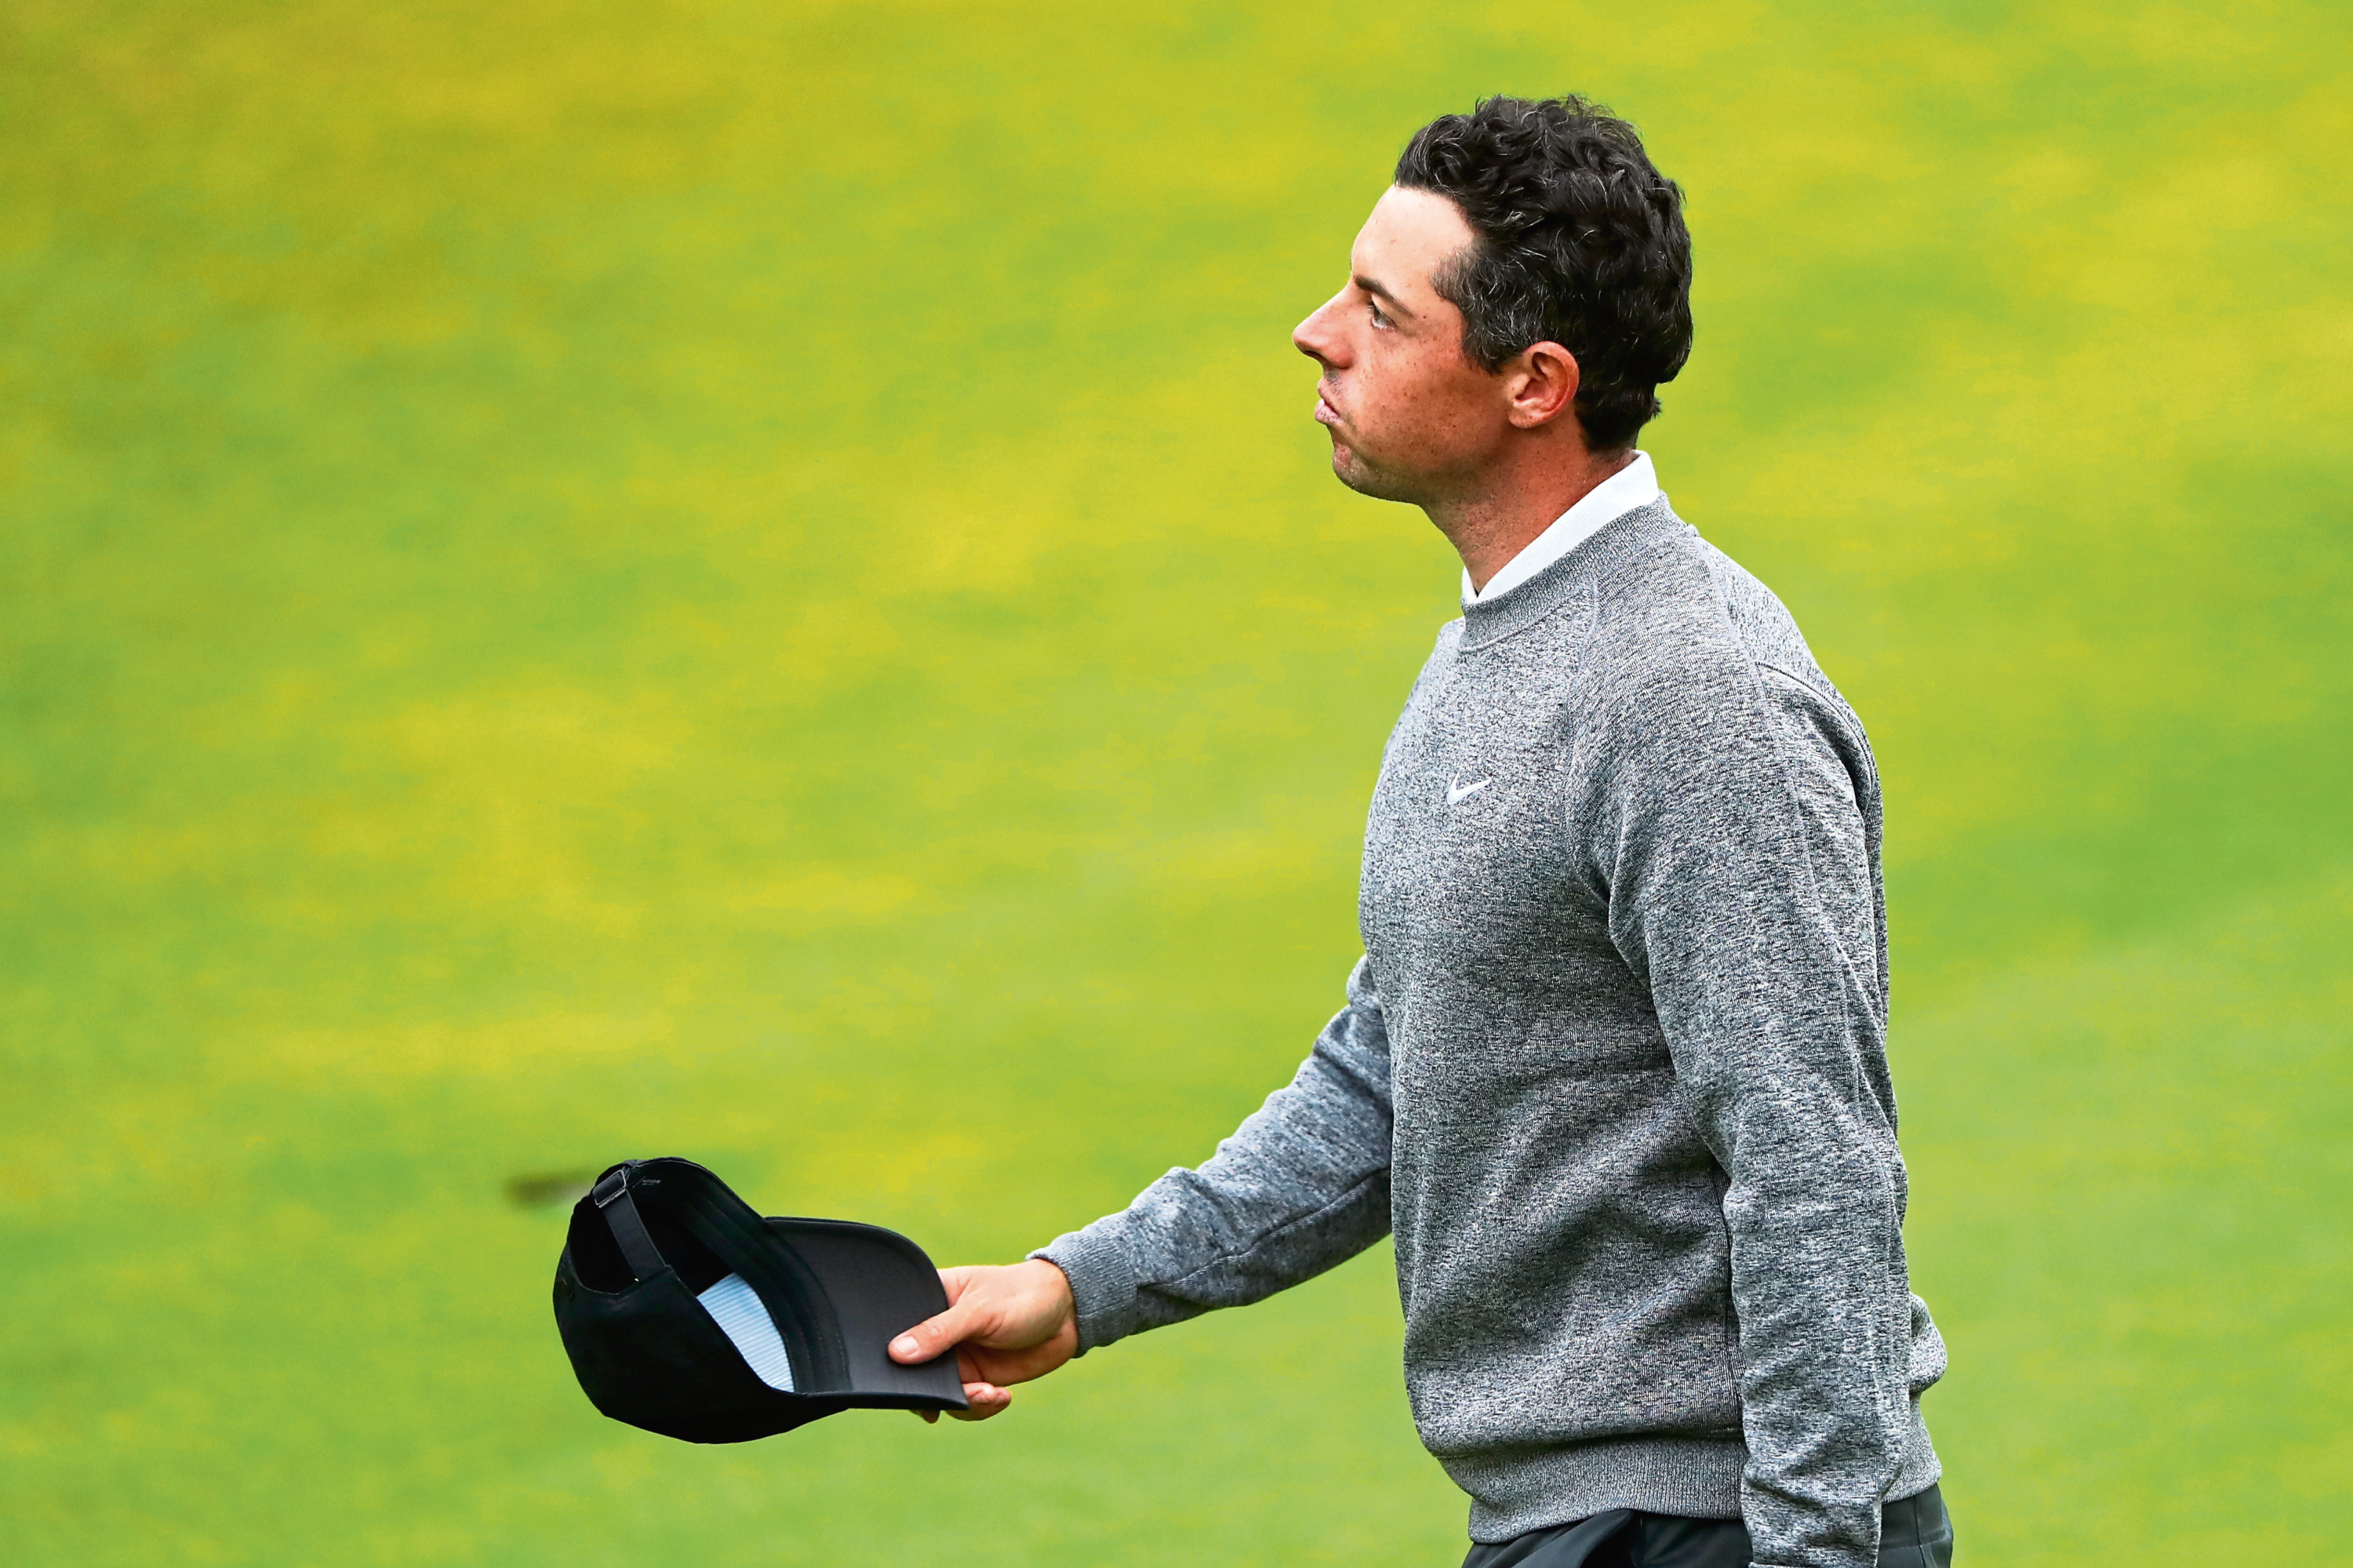 Rory McIlroy of Northern Ireland reacts on the 18th during the second round of the 148th Open Championship held on the Dunluce Links at Royal Portrush Golf Club on July 19, 2019 in Portrush, United Kingdom. (Photo by Francois Nel/Getty Images)